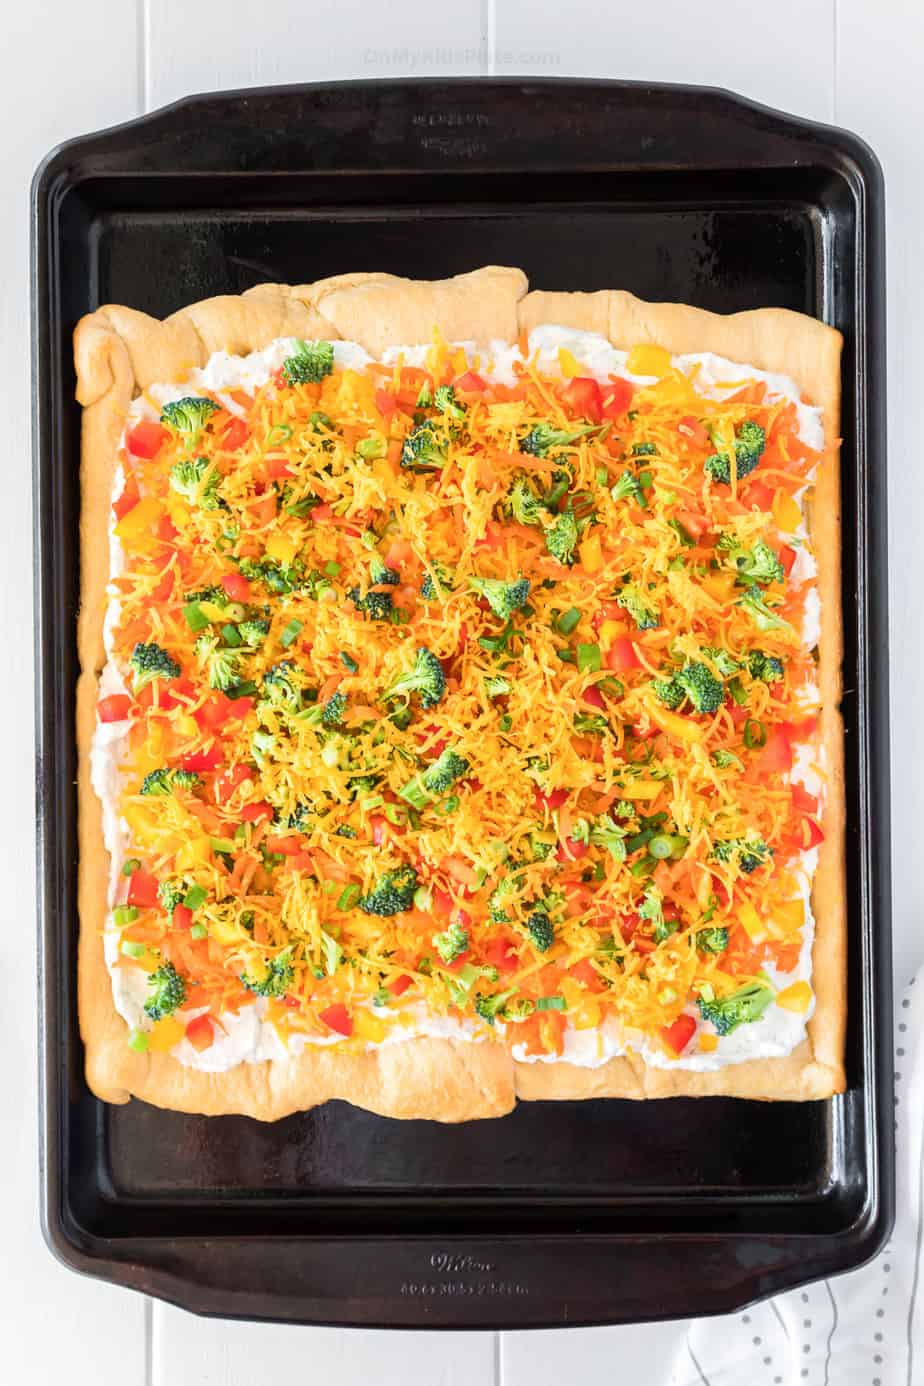 veggie pizza topped with veggies and cheese on the pan